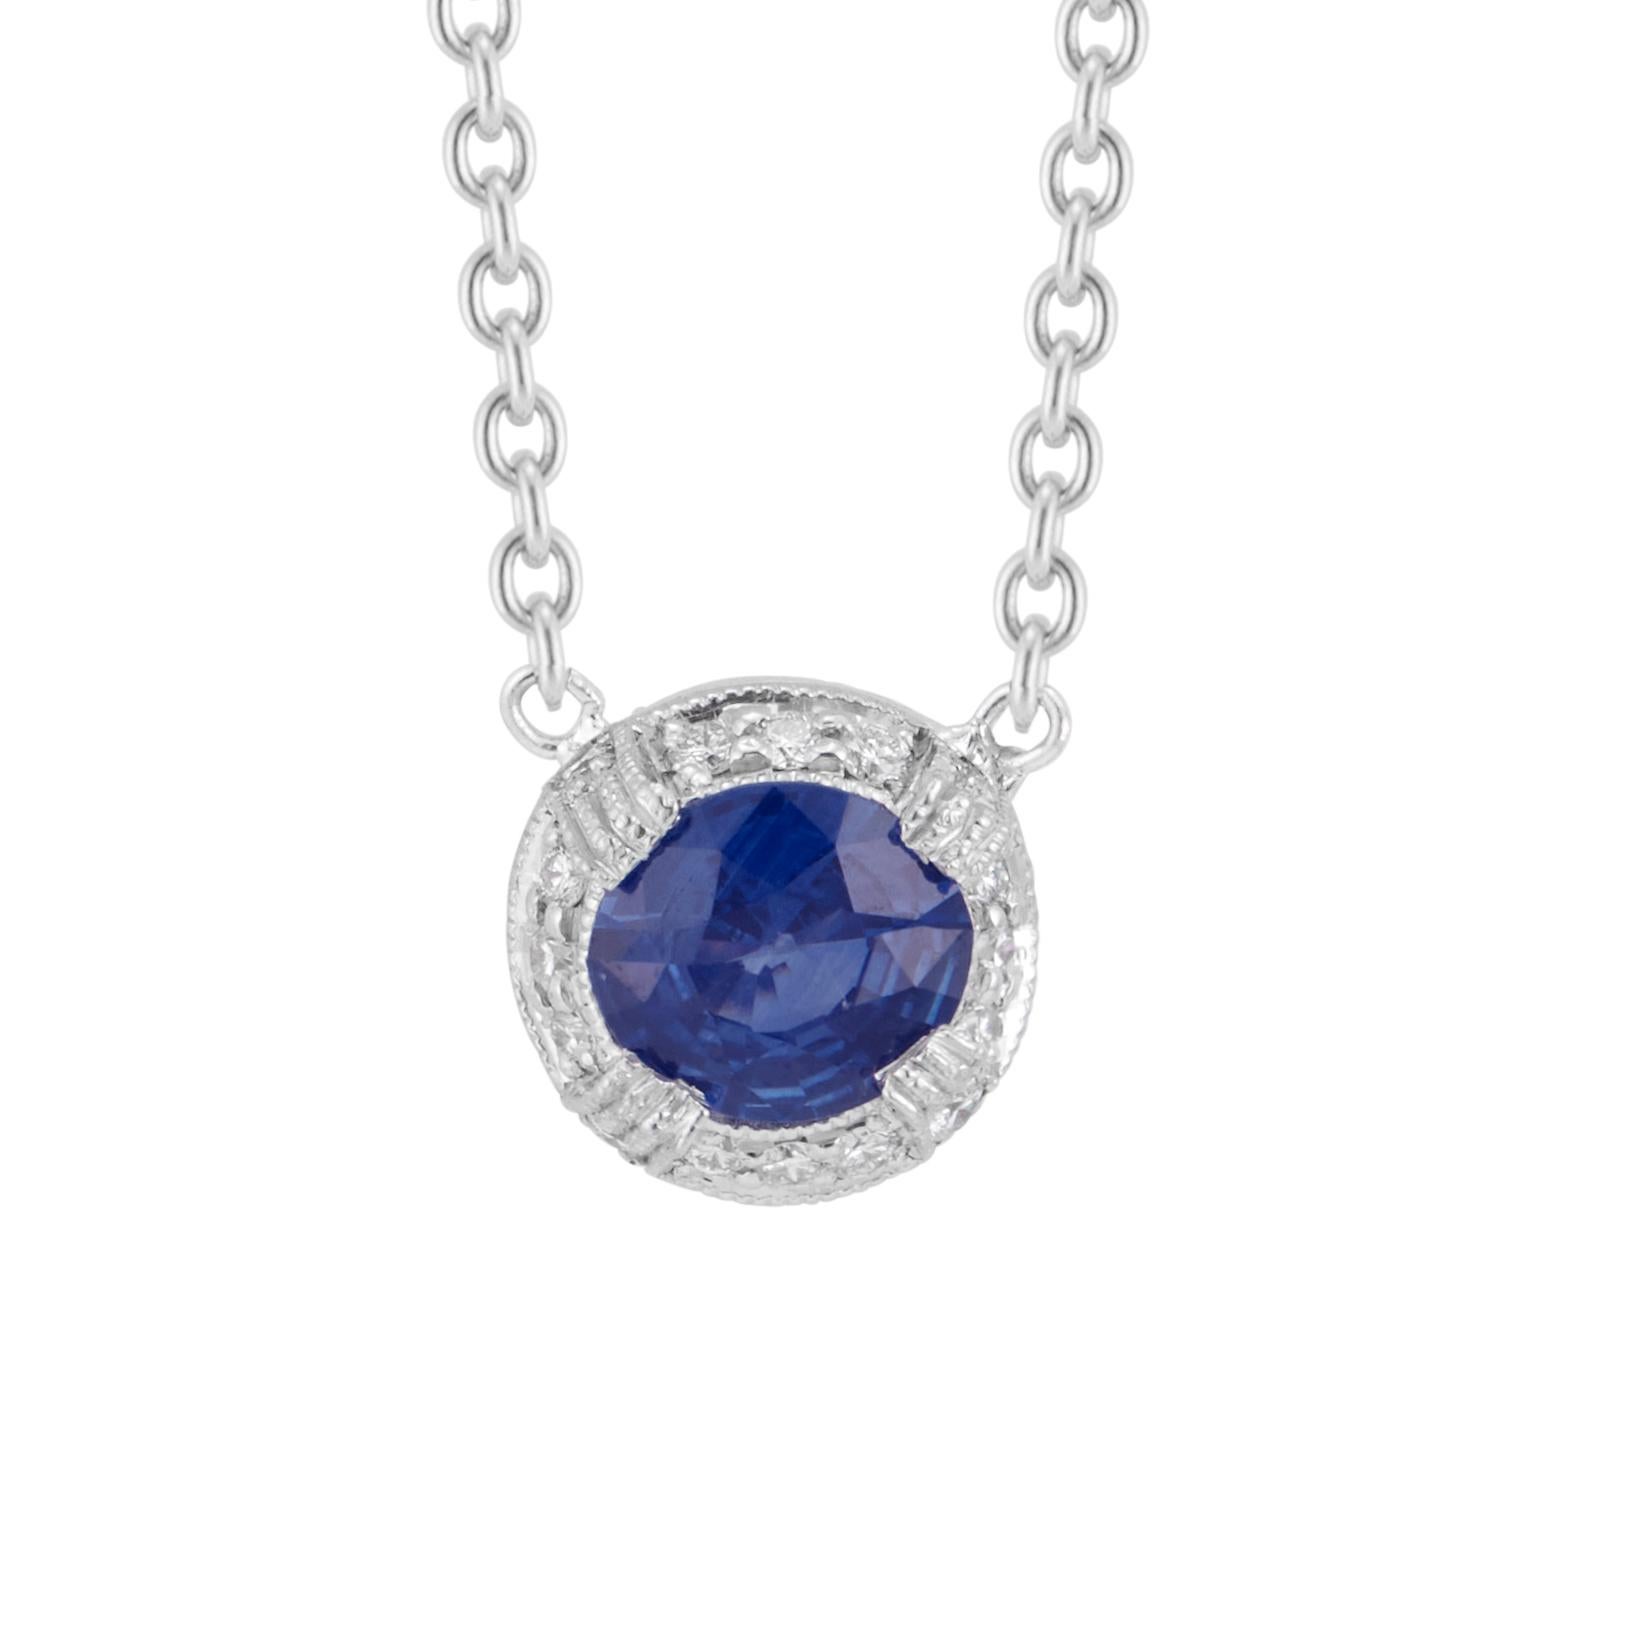 Sapphire and diamond necklace. GIA round sapphire and pave diamond halo pendant necklace. 16 inch platinum cable chain. Sapphire is certified simple heat only.

1 round gem blue fine Sapphire, approx. total weight .88cts, VS, 6.15 x 6.10ct, 39mm,